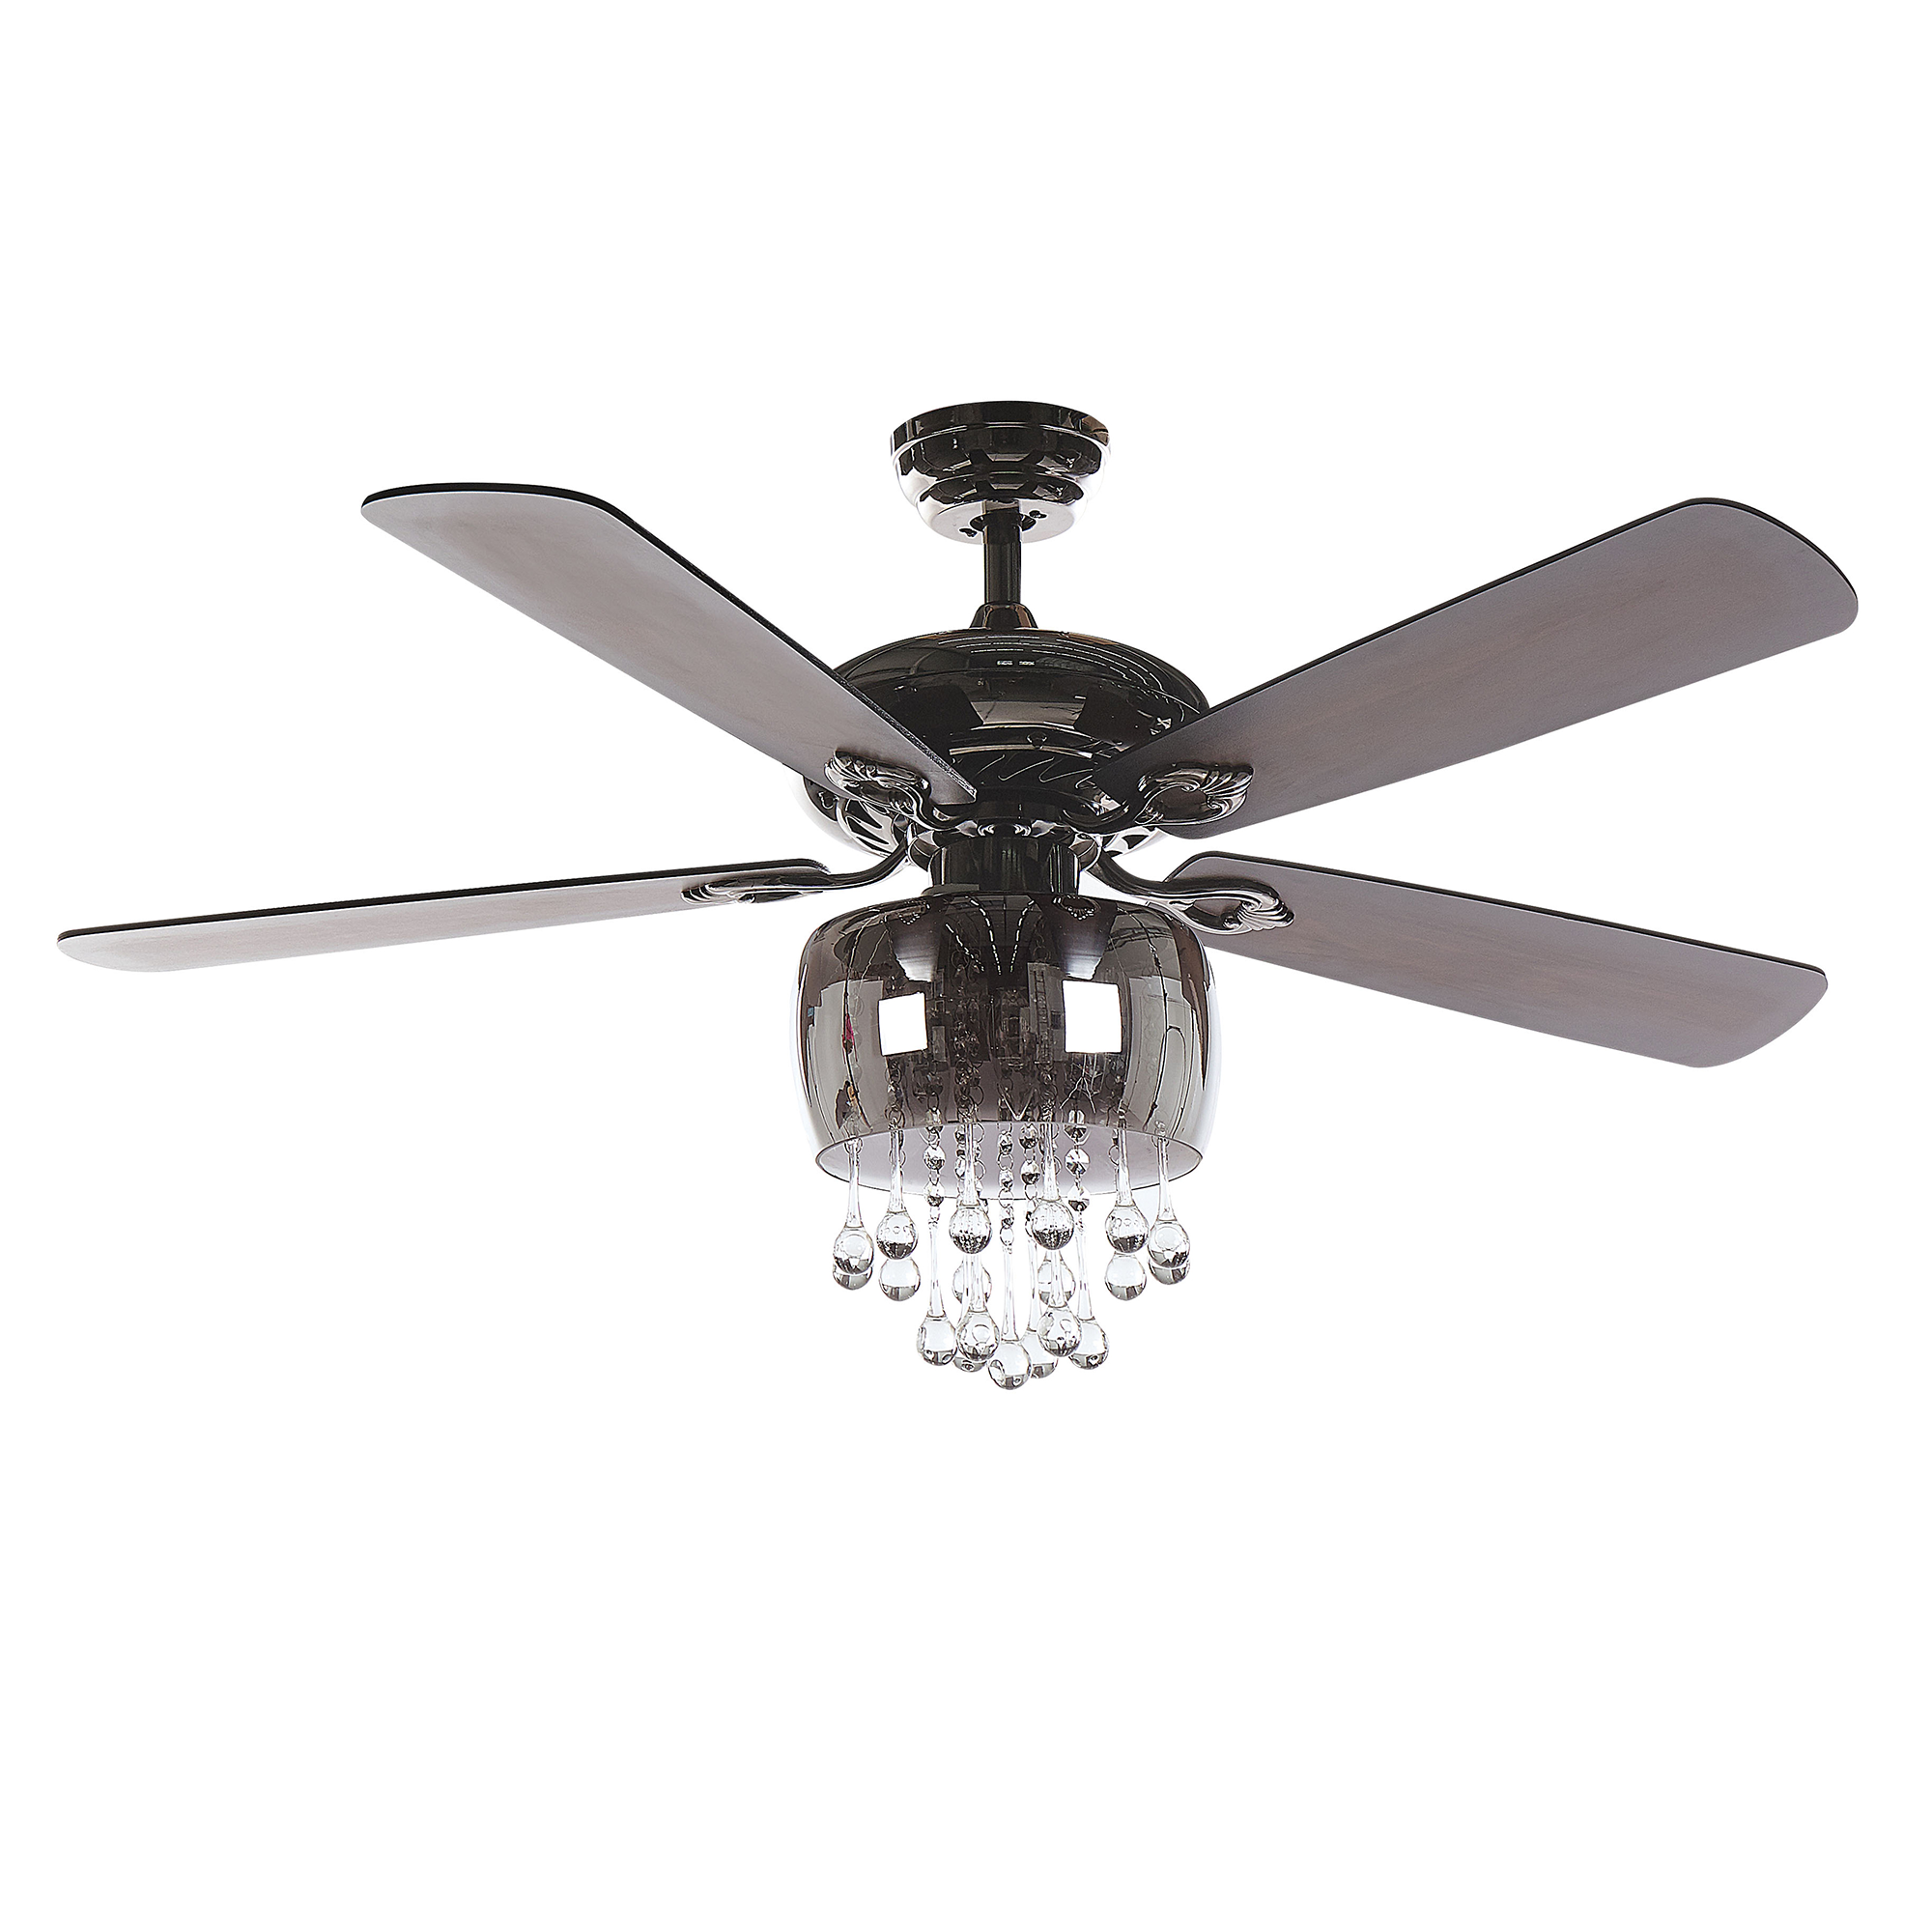 Beliani Ceiling Fan with Light Black Glass Metal Plywood Reversible Blades with Remote Control 3 Speeds Switch Timer Glamour Retro Design